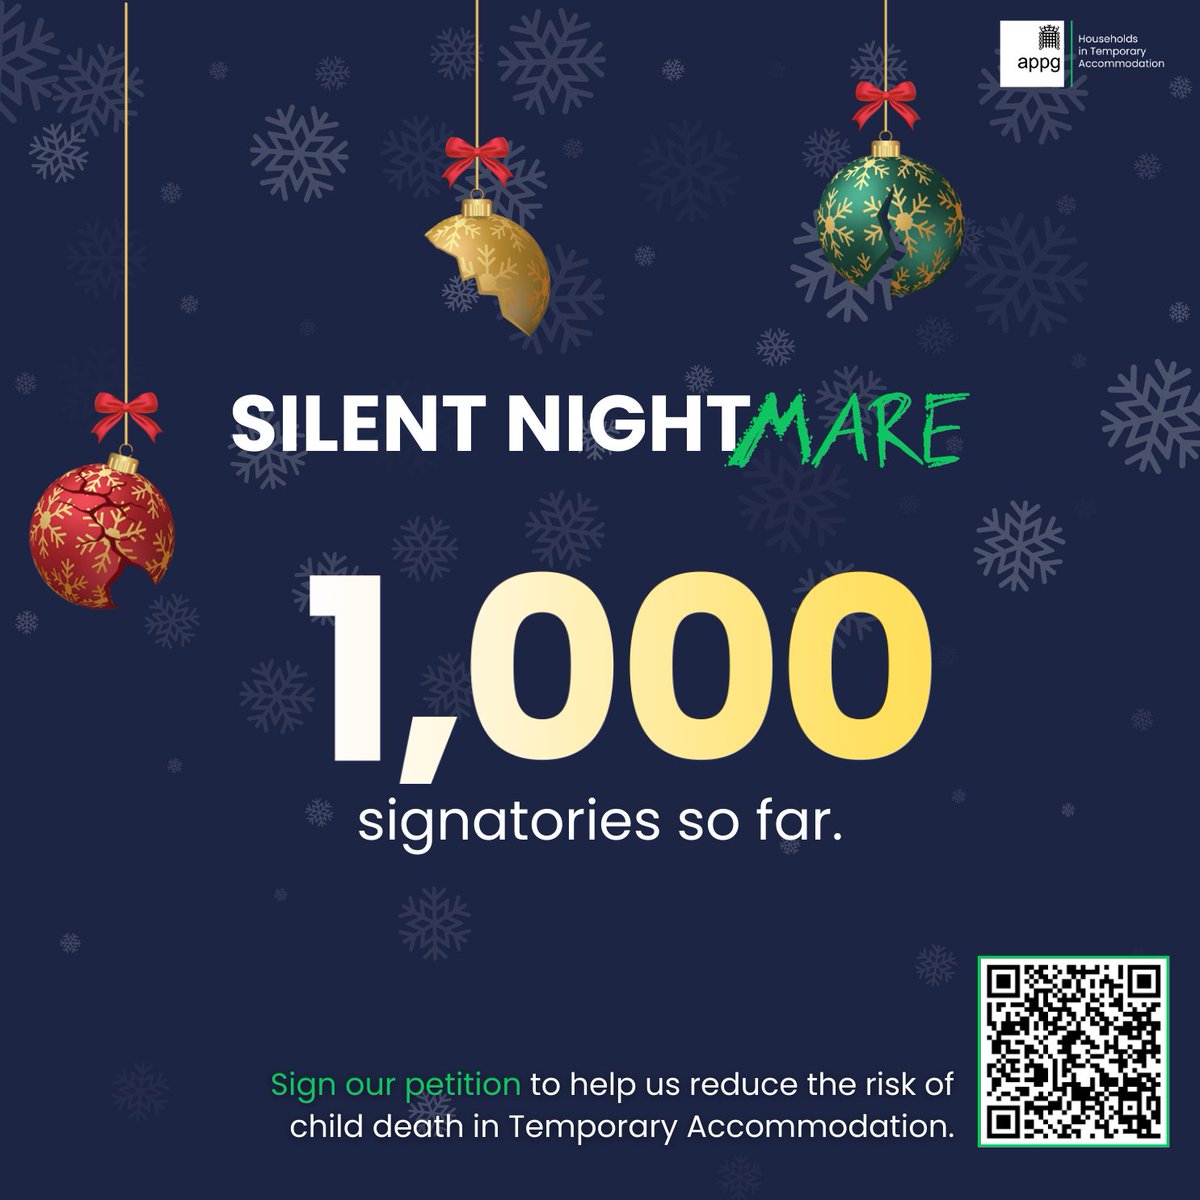 We've just reached 1,000 signatures! Thank you to everyone for your support. We need as many voices to help protect the lives of the voiceless. Please sign the #SilentNightmare petition today to ensure homeless babies have a safe place to sleep: …seholdsintemporaryaccommodation.co.uk/silent-nightma…